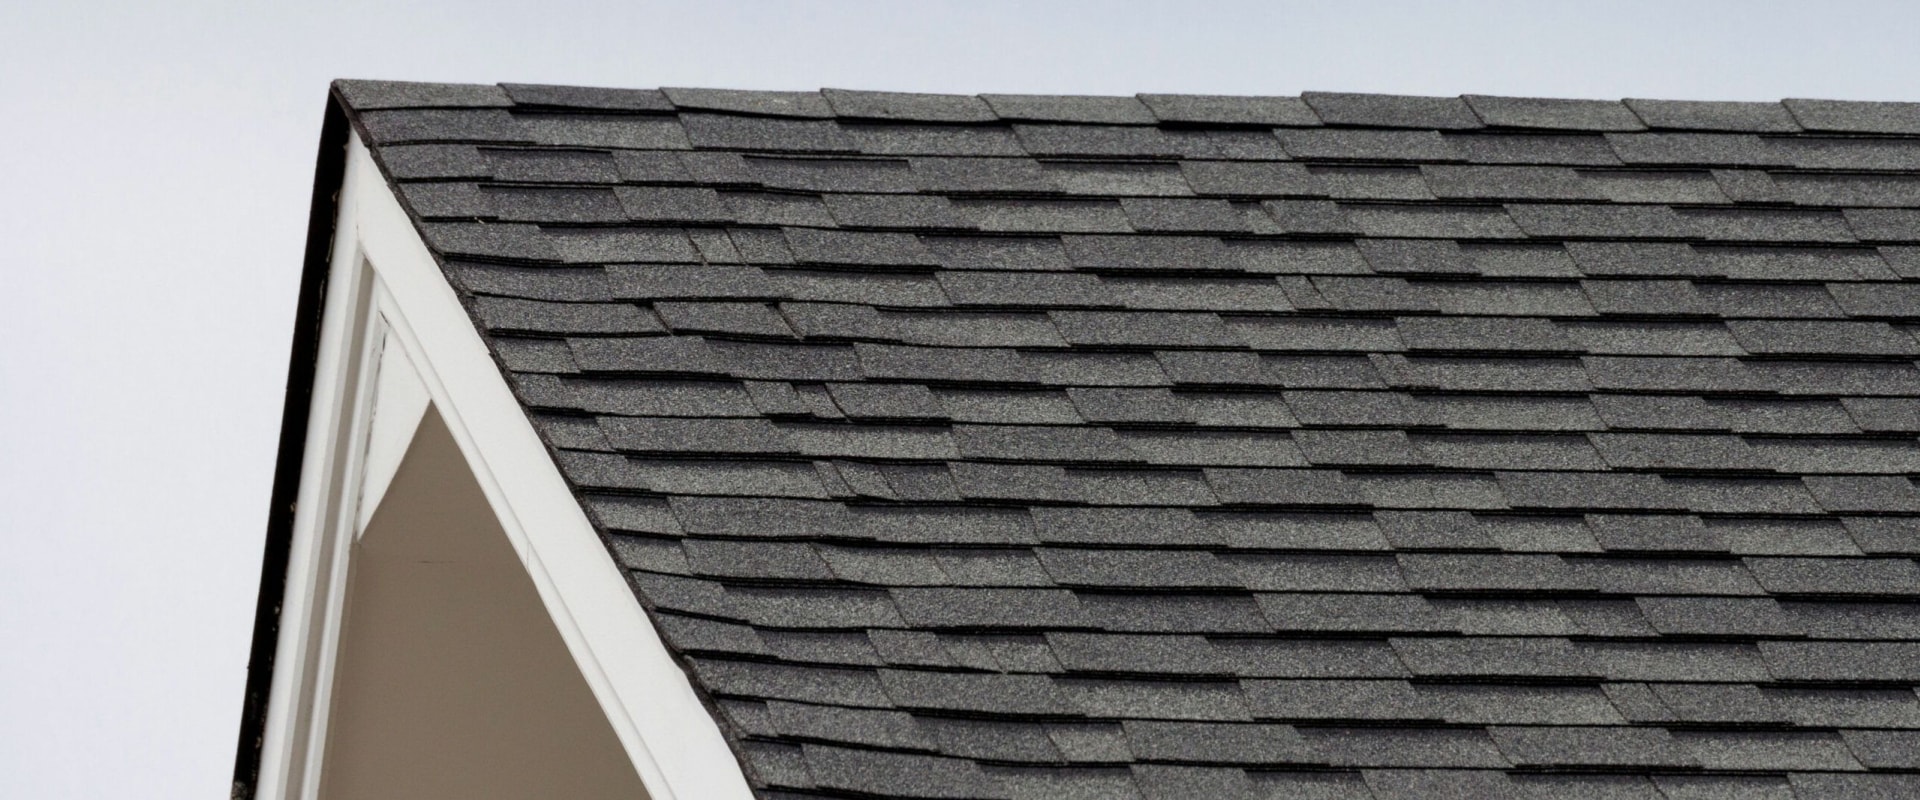 What is usually included in a roof replacement?